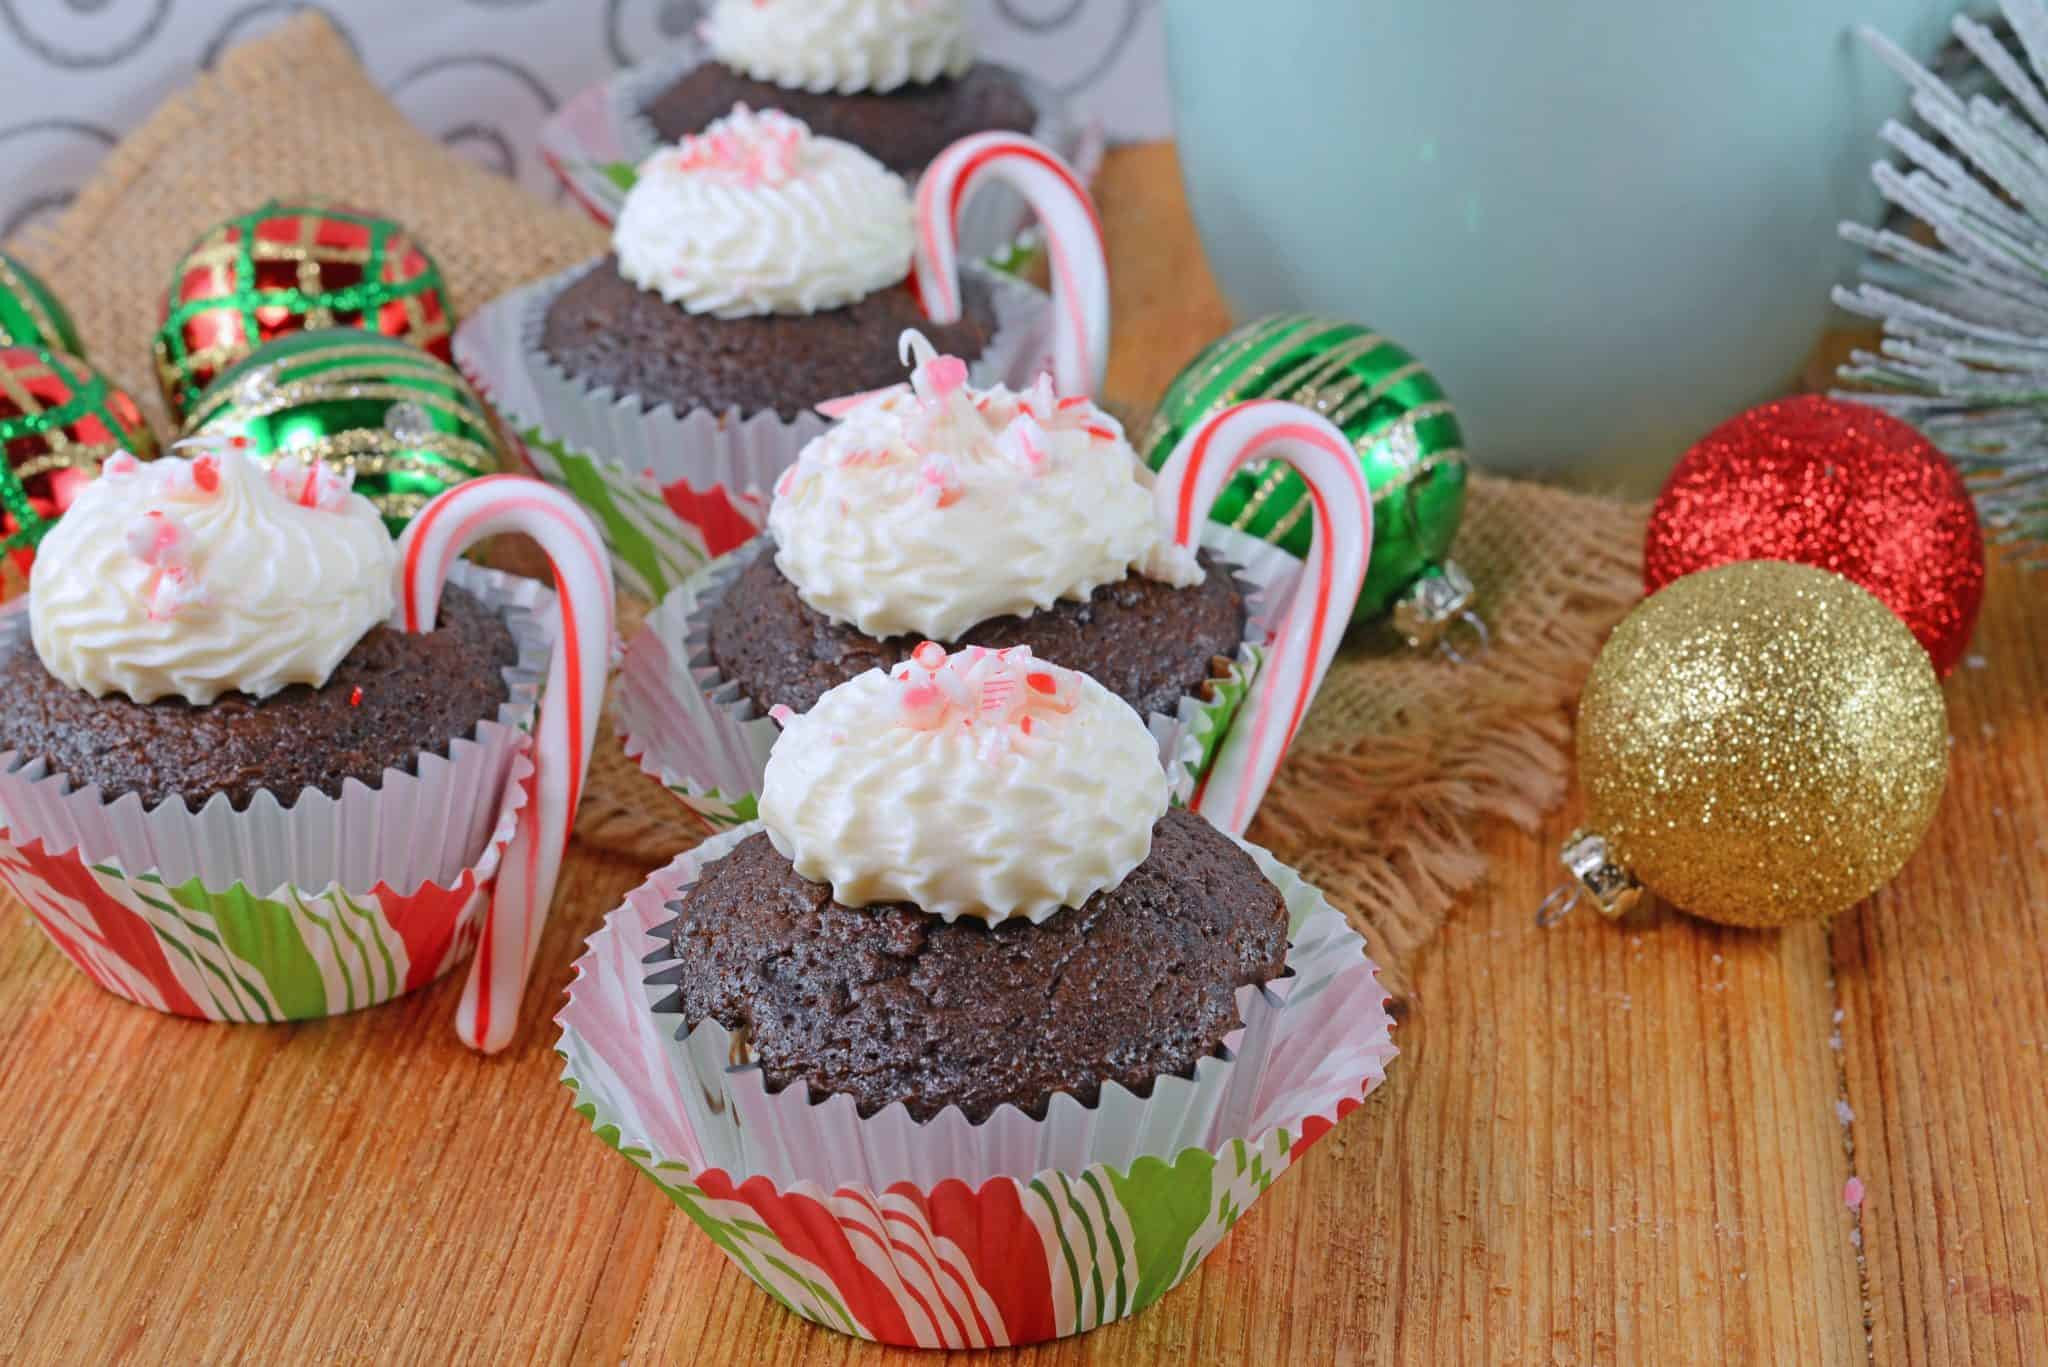 Peppermint Mocha Cupcakes use doctored up box mix, marshmallow creme frosting and candy canes for the ultimate kid-friendly cupcake recipe! #mochacupcakes #christmascupcakes www.savoryexperiments.com